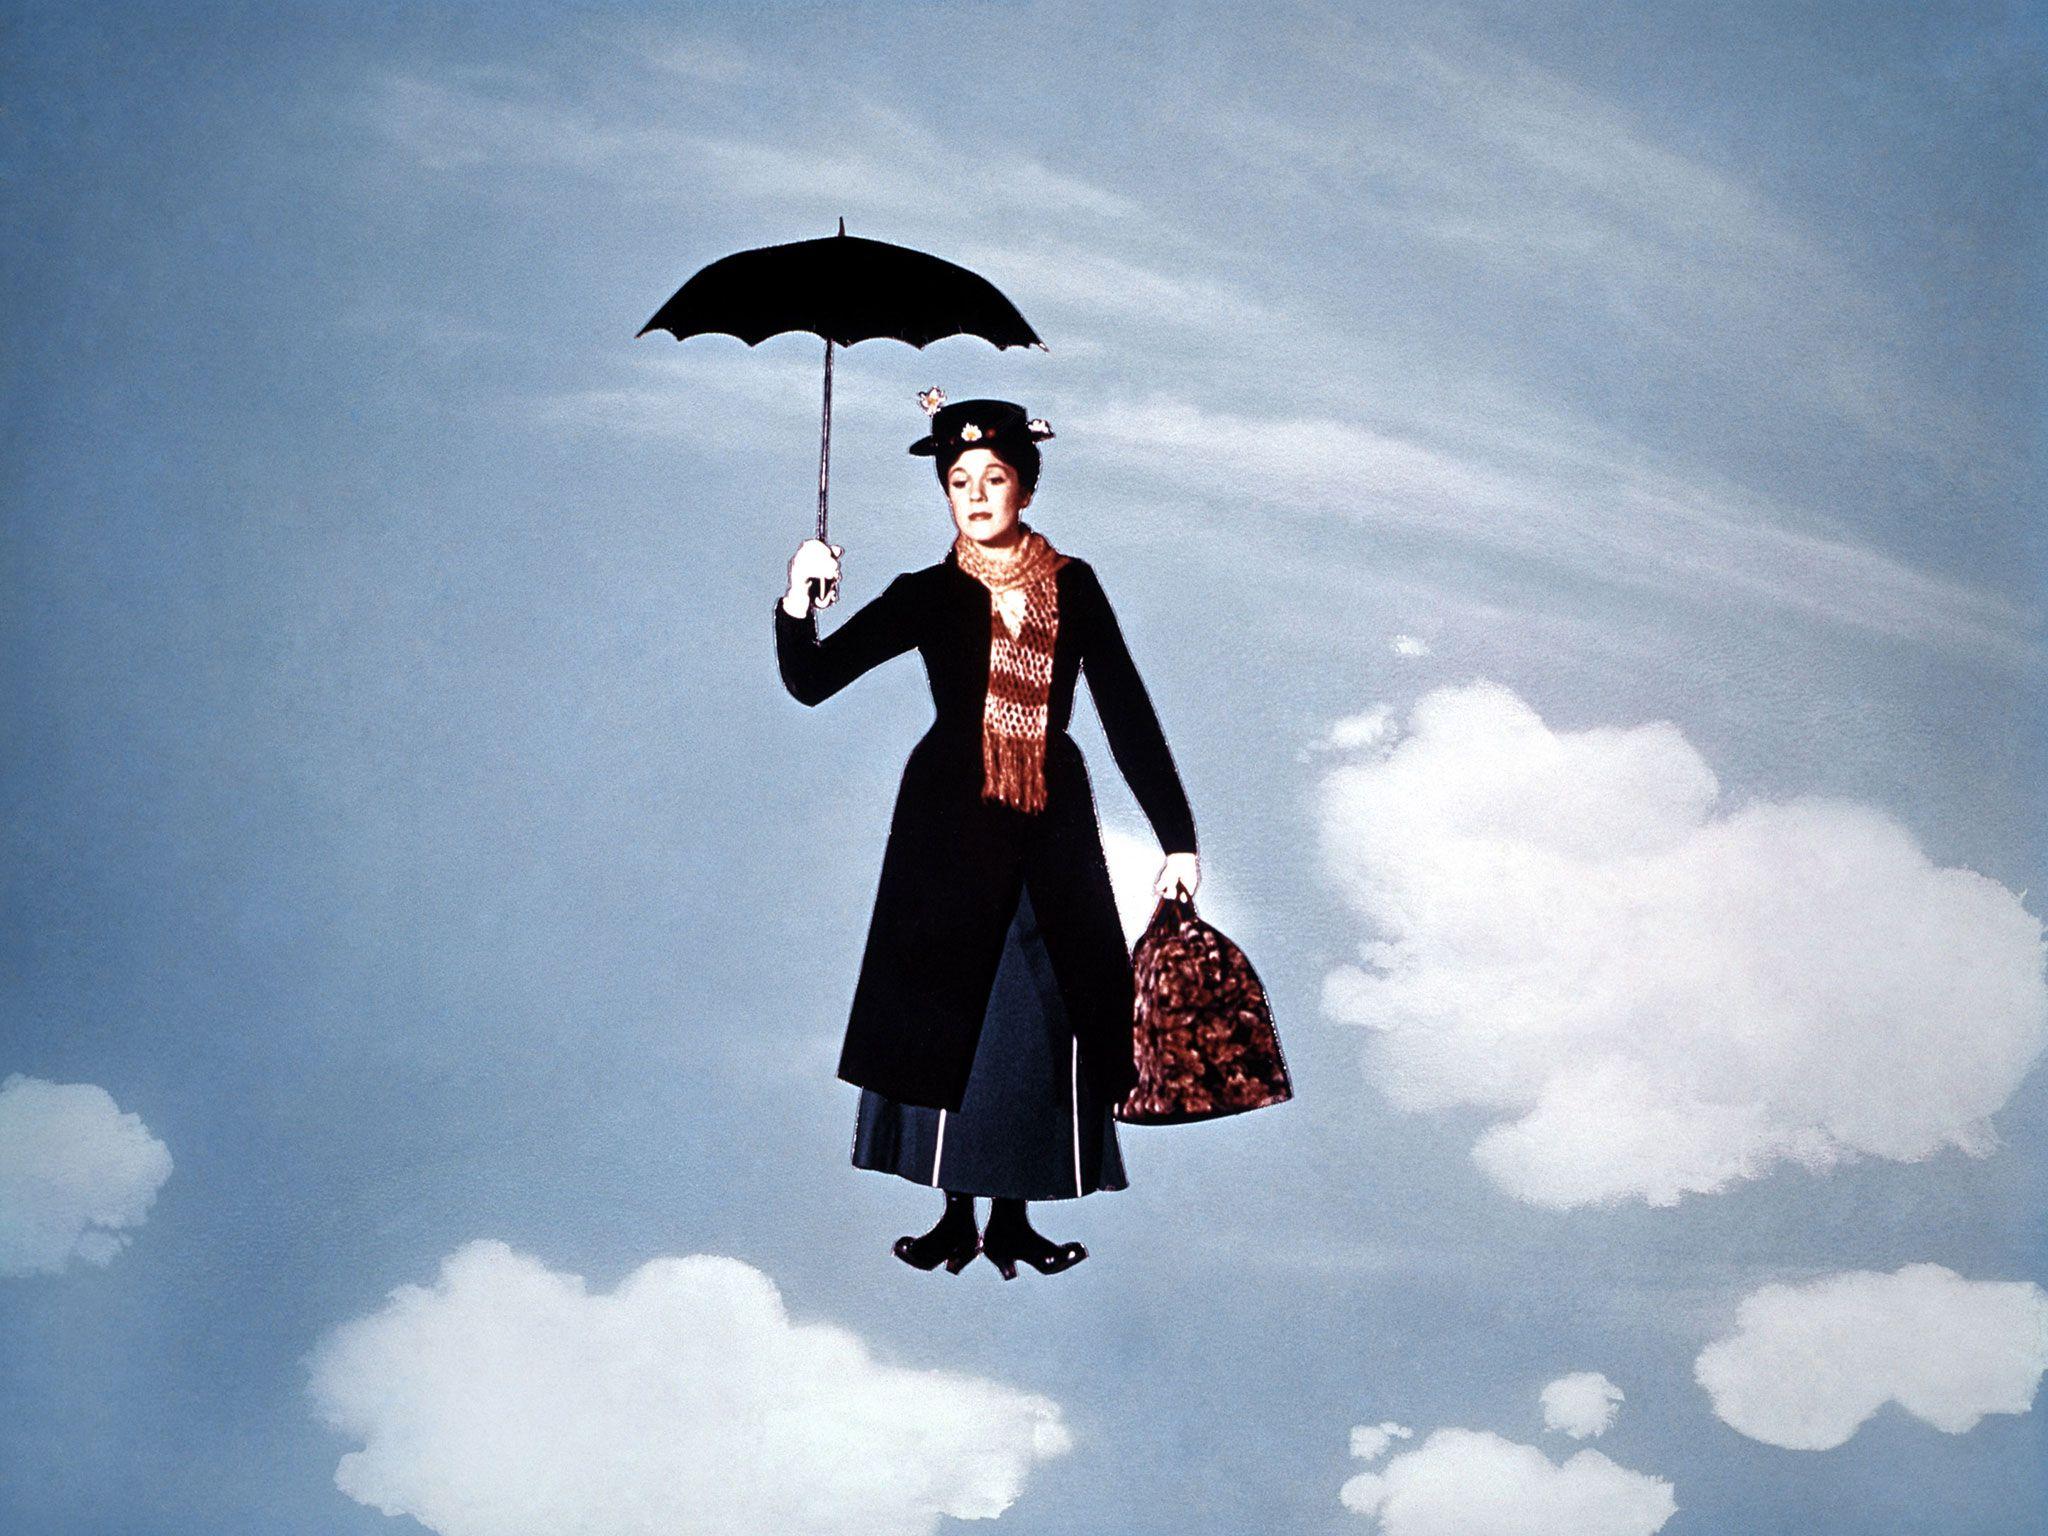 Mary Poppins floating in the sky with her umbrella